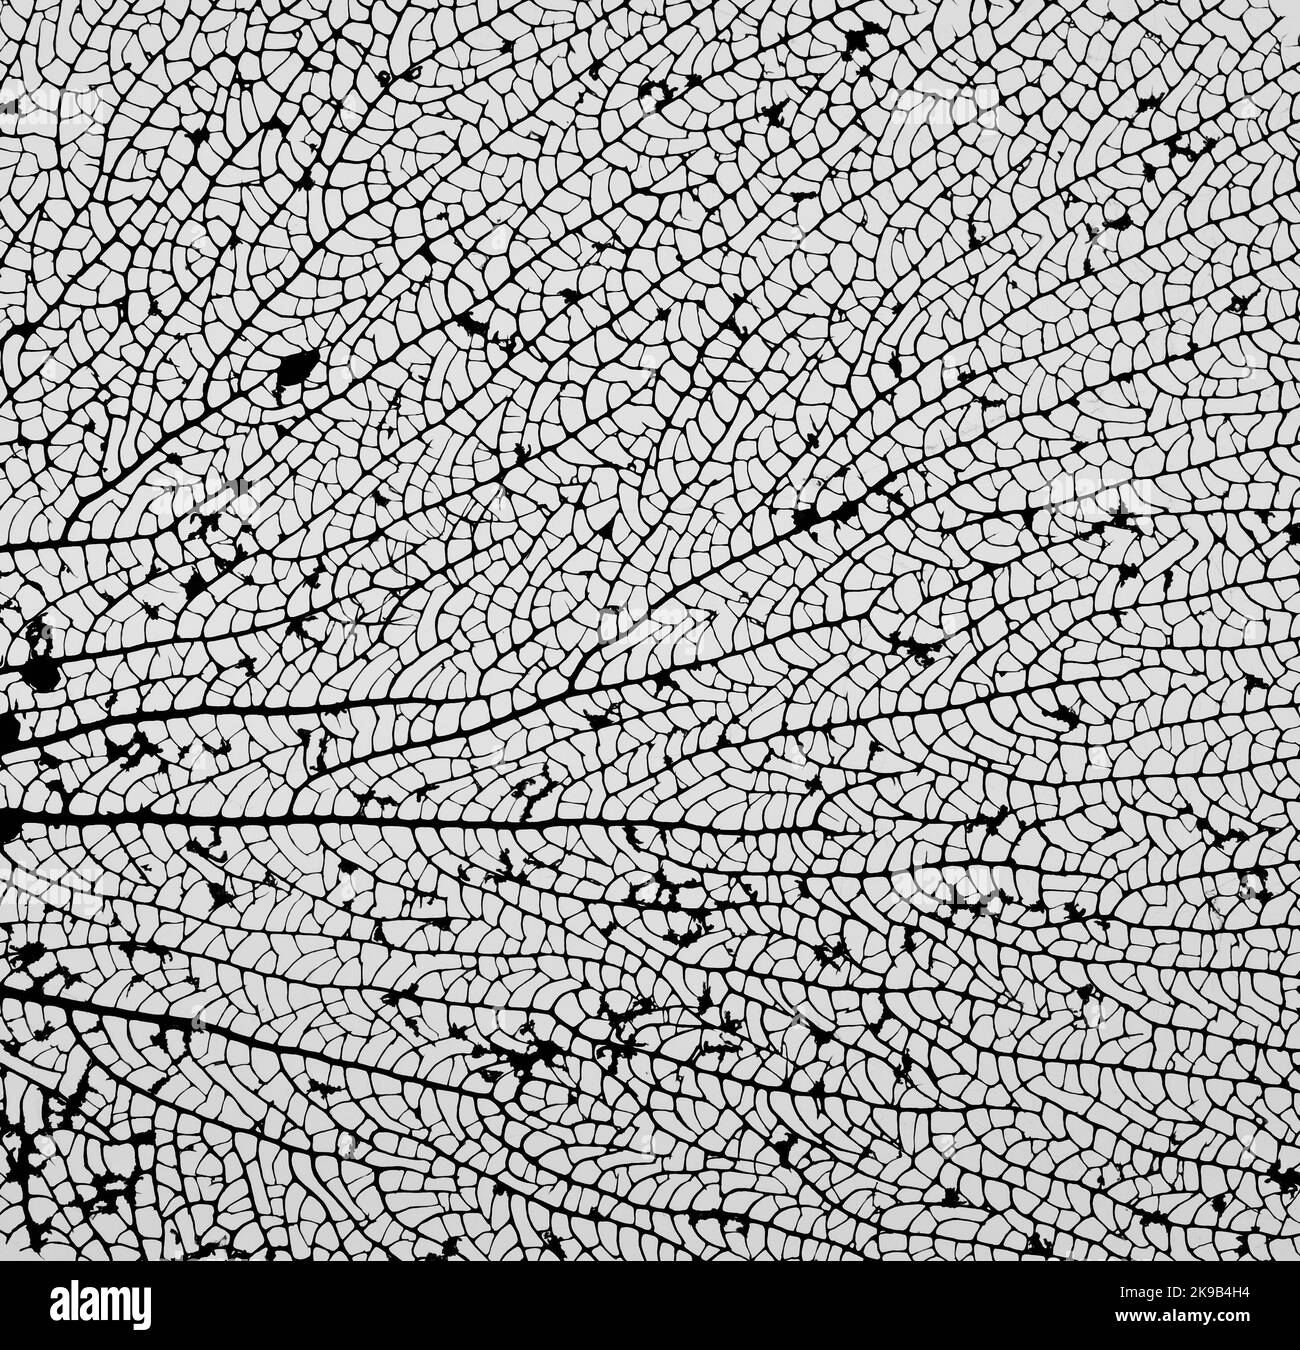 Abstract close up graphic texture of dried up black and white leaf structure  pattern in nature. Dynamic design element for poster/backdrop/wallpaper. Stock Photo